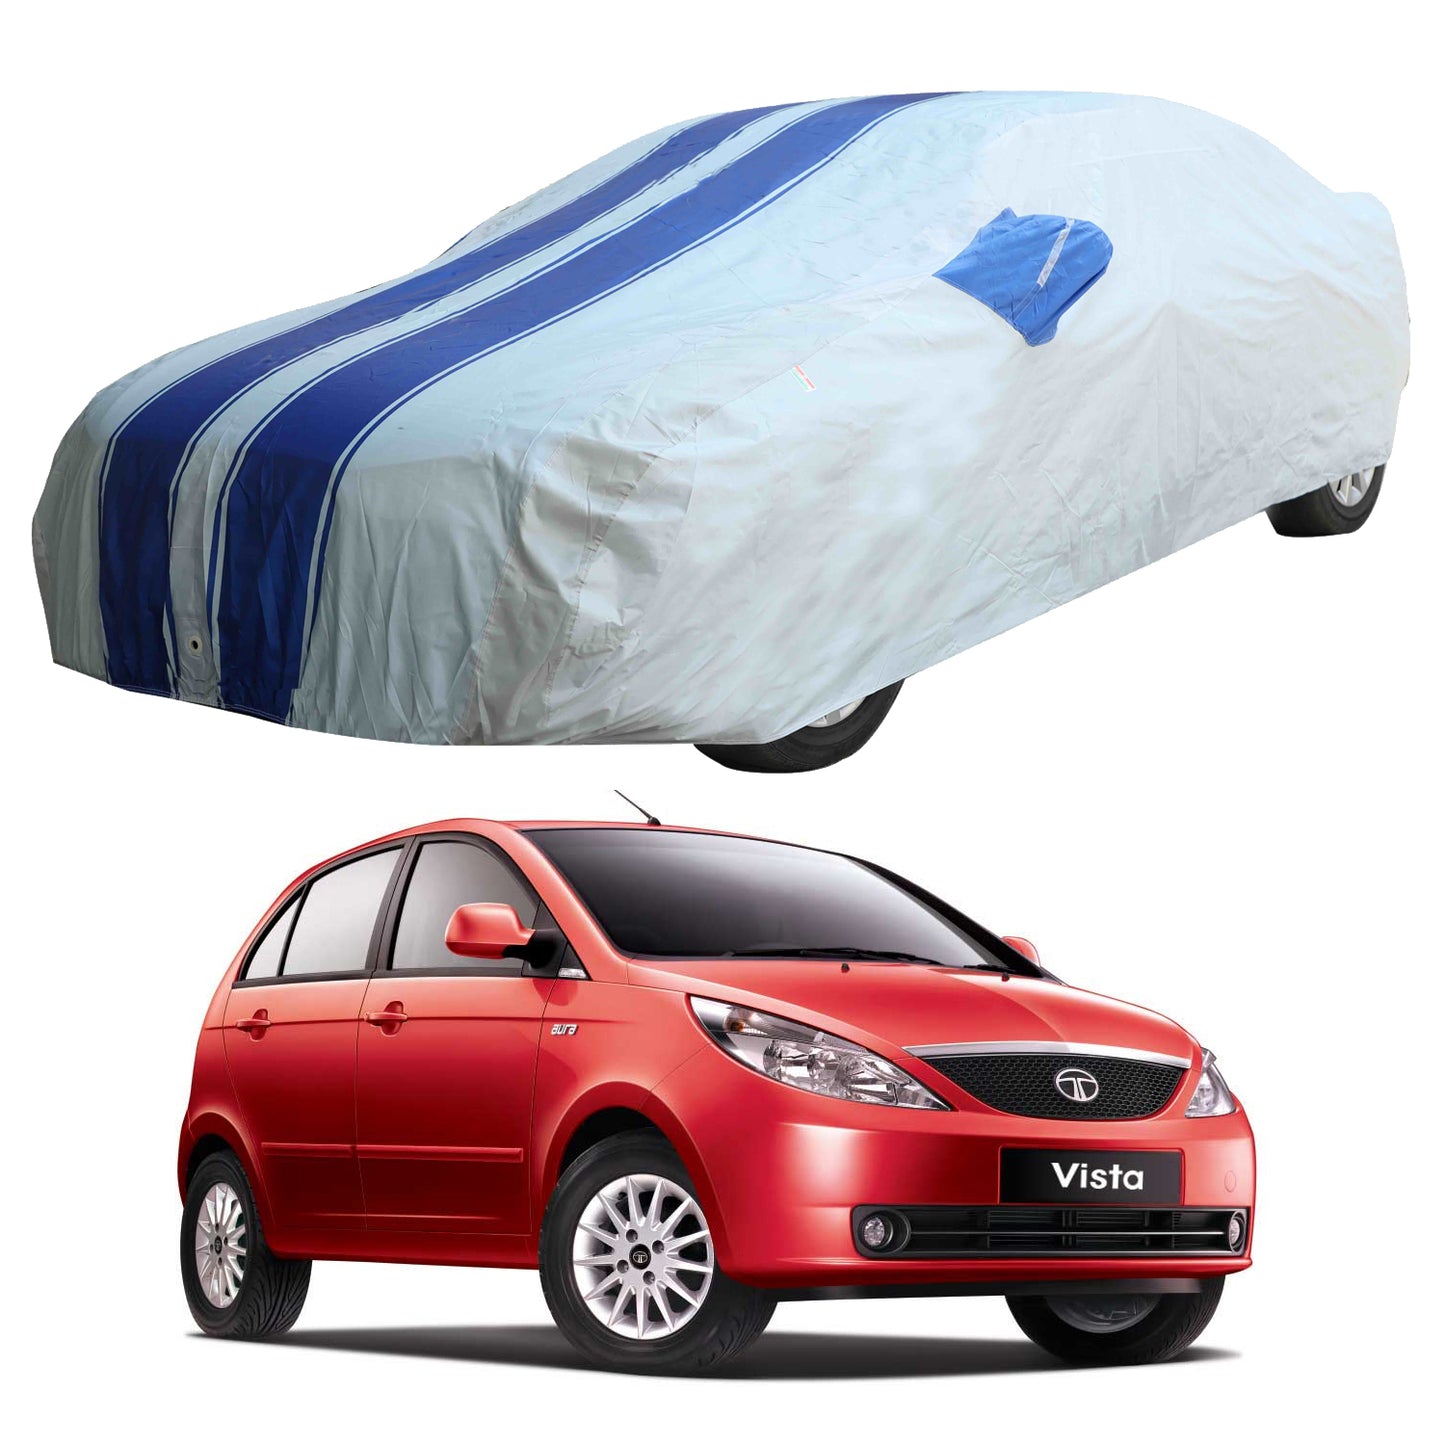 Oshotto 100% Blue dustproof and Water Resistant Car Body Cover with Mirror Pockets For Tata Vista